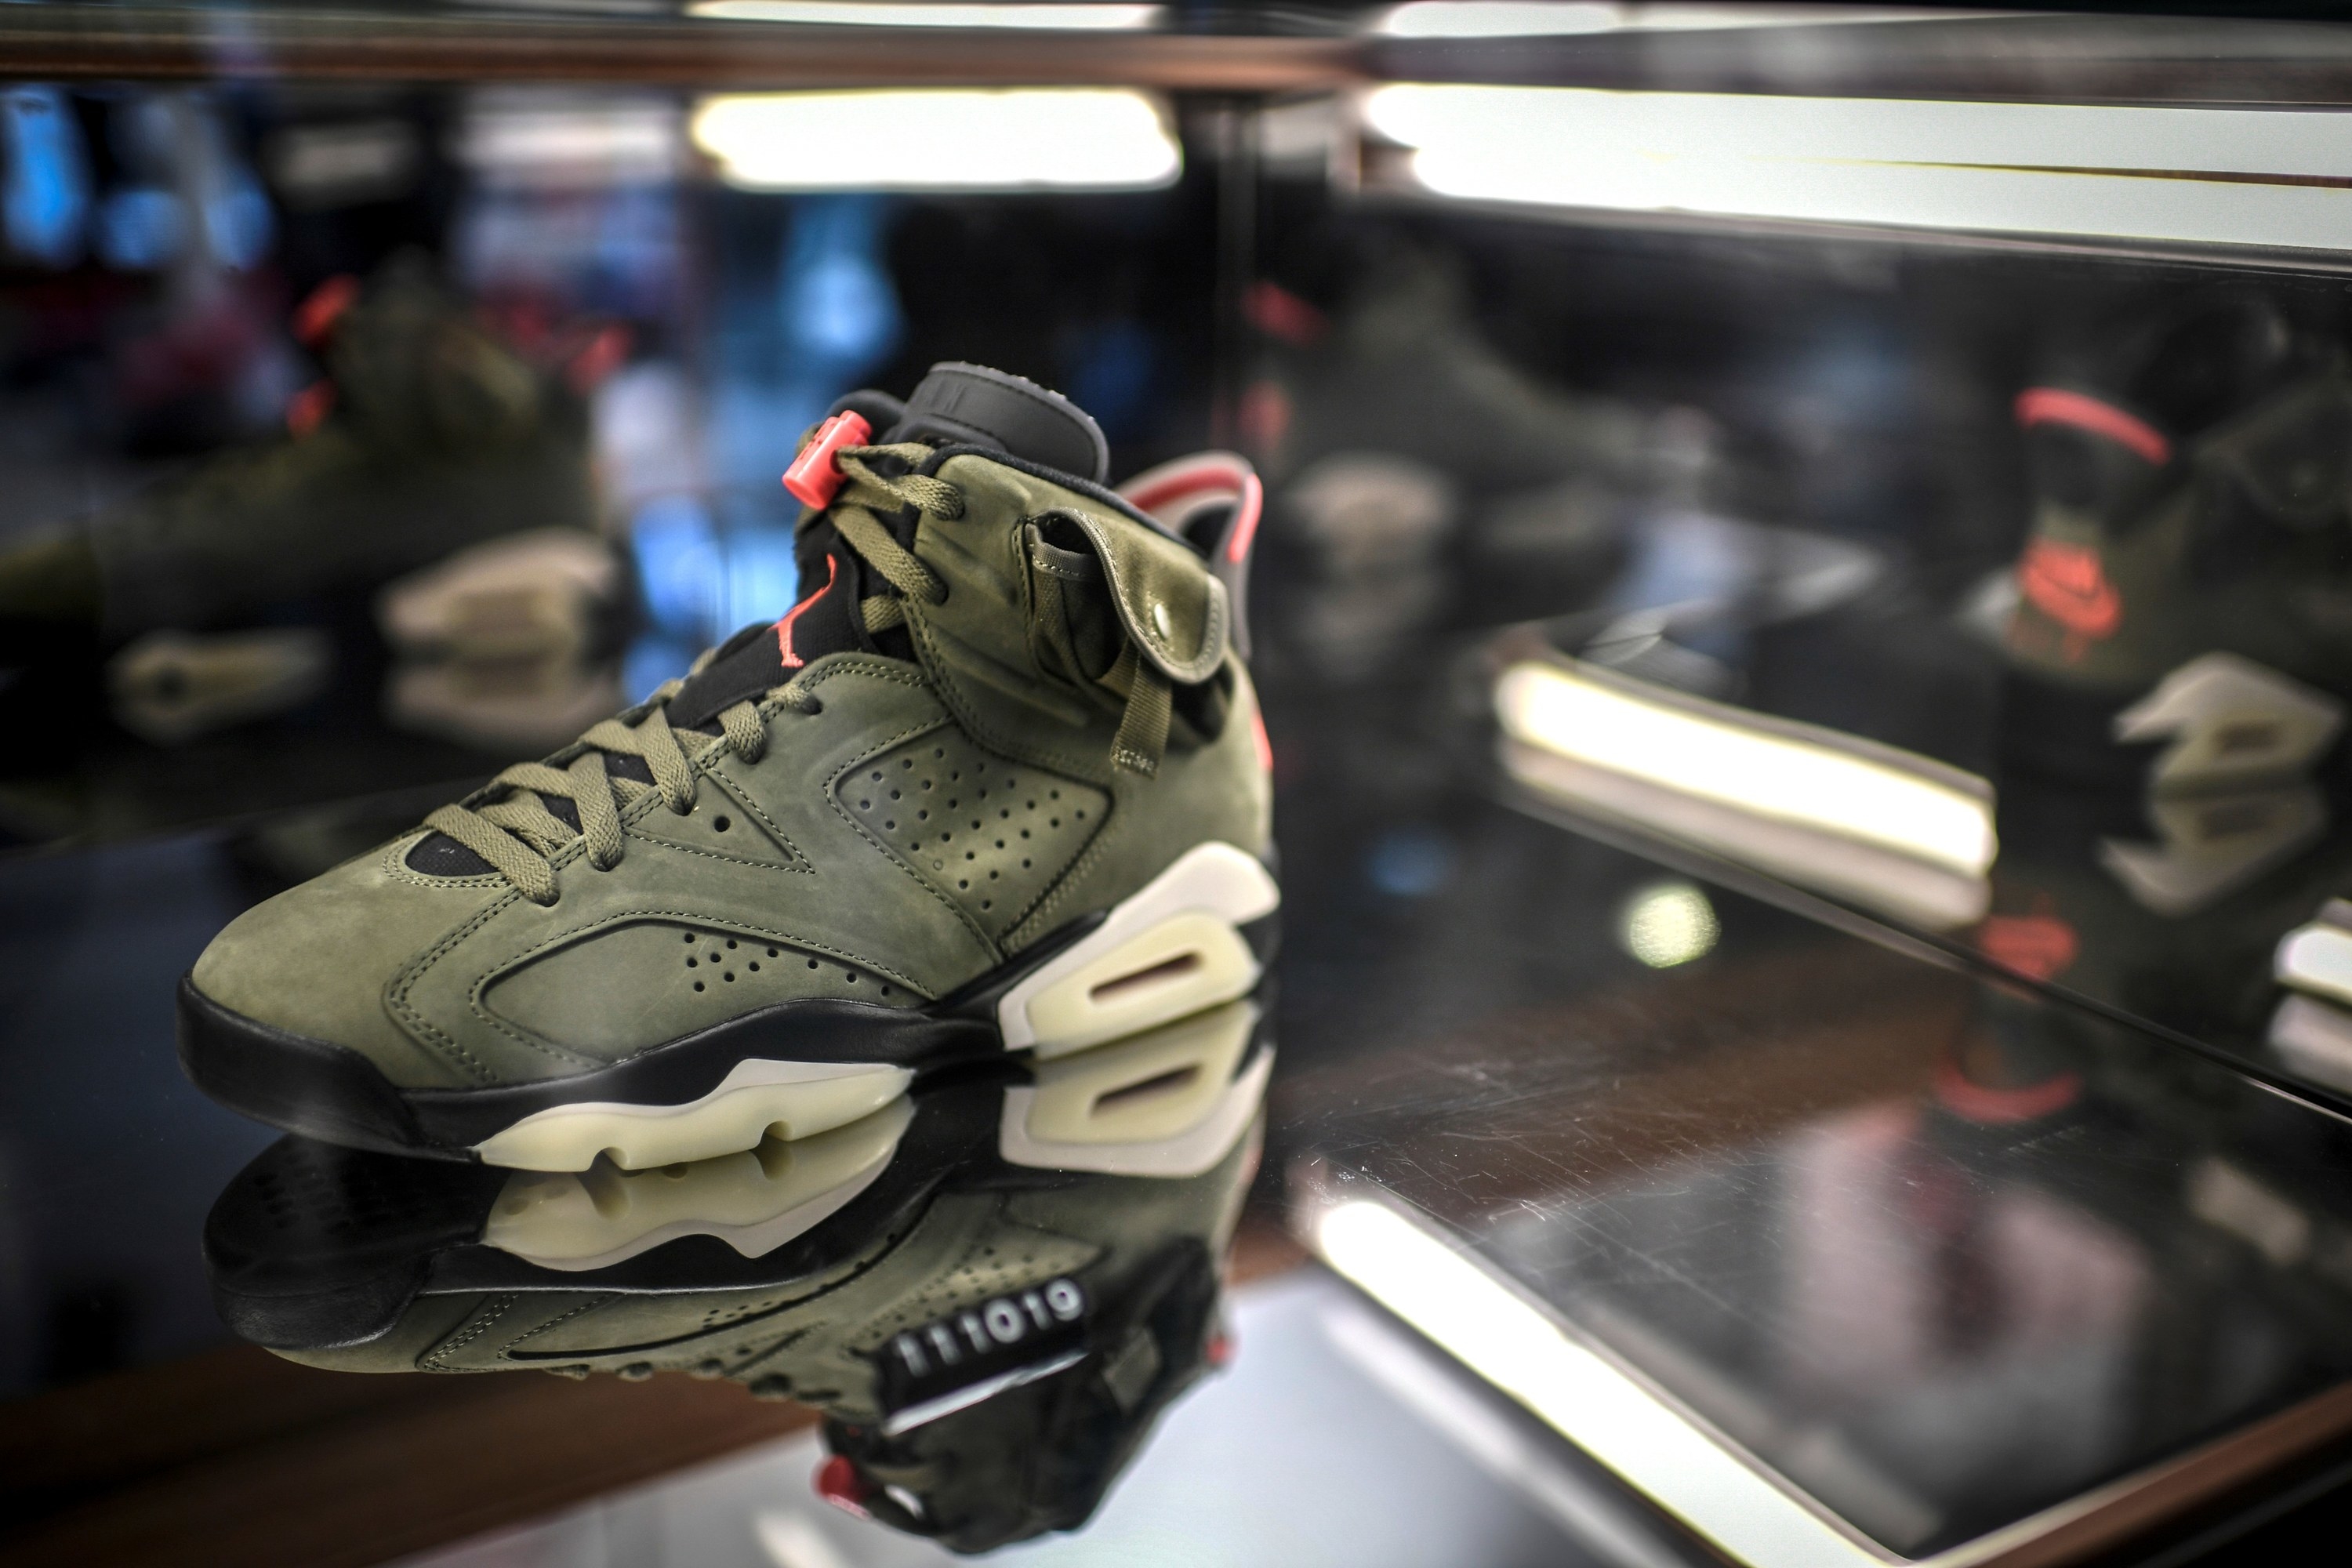 A limited-edition Travis Scott x Air Jordan 6 sneaker is displayed in a shop as part of the &quot;raffles&quot; on October 8, 2019, in Paris